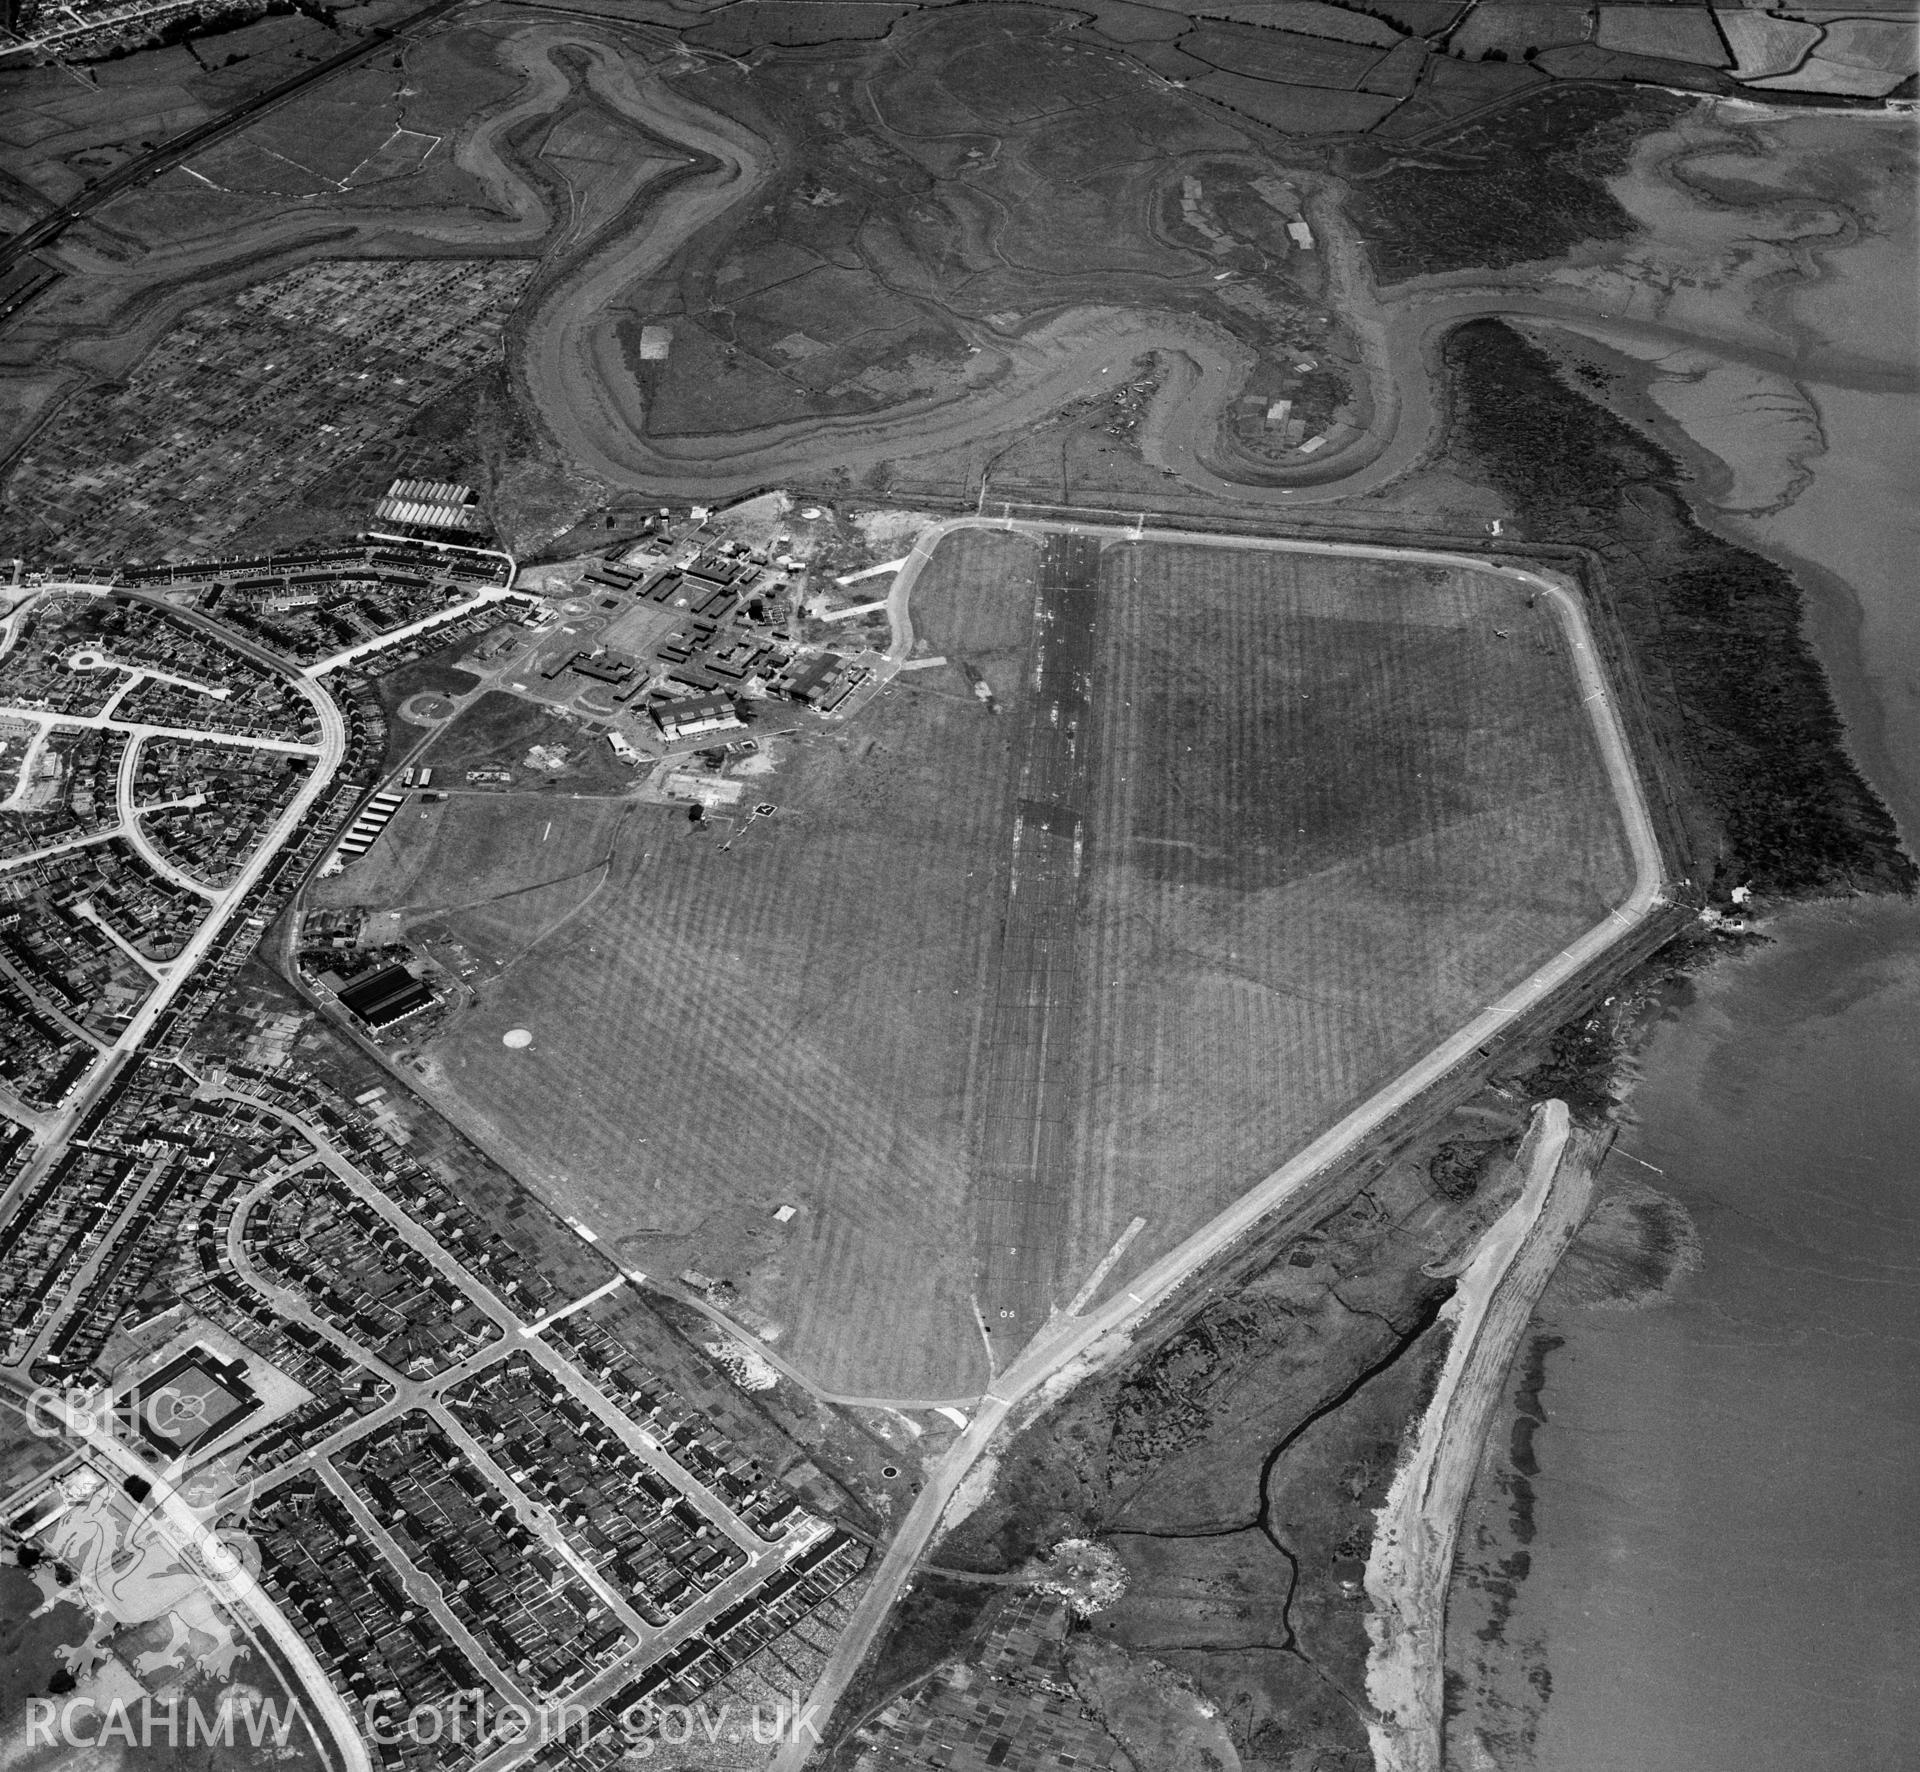 Digital copy of a black and white, oblique aerial photograph of Cardiff Aerodrome, Cardiff. The photograph shows a view from the South West. Note the extensive facilities constructed during its wartime incarnation as RAF Cardiff.